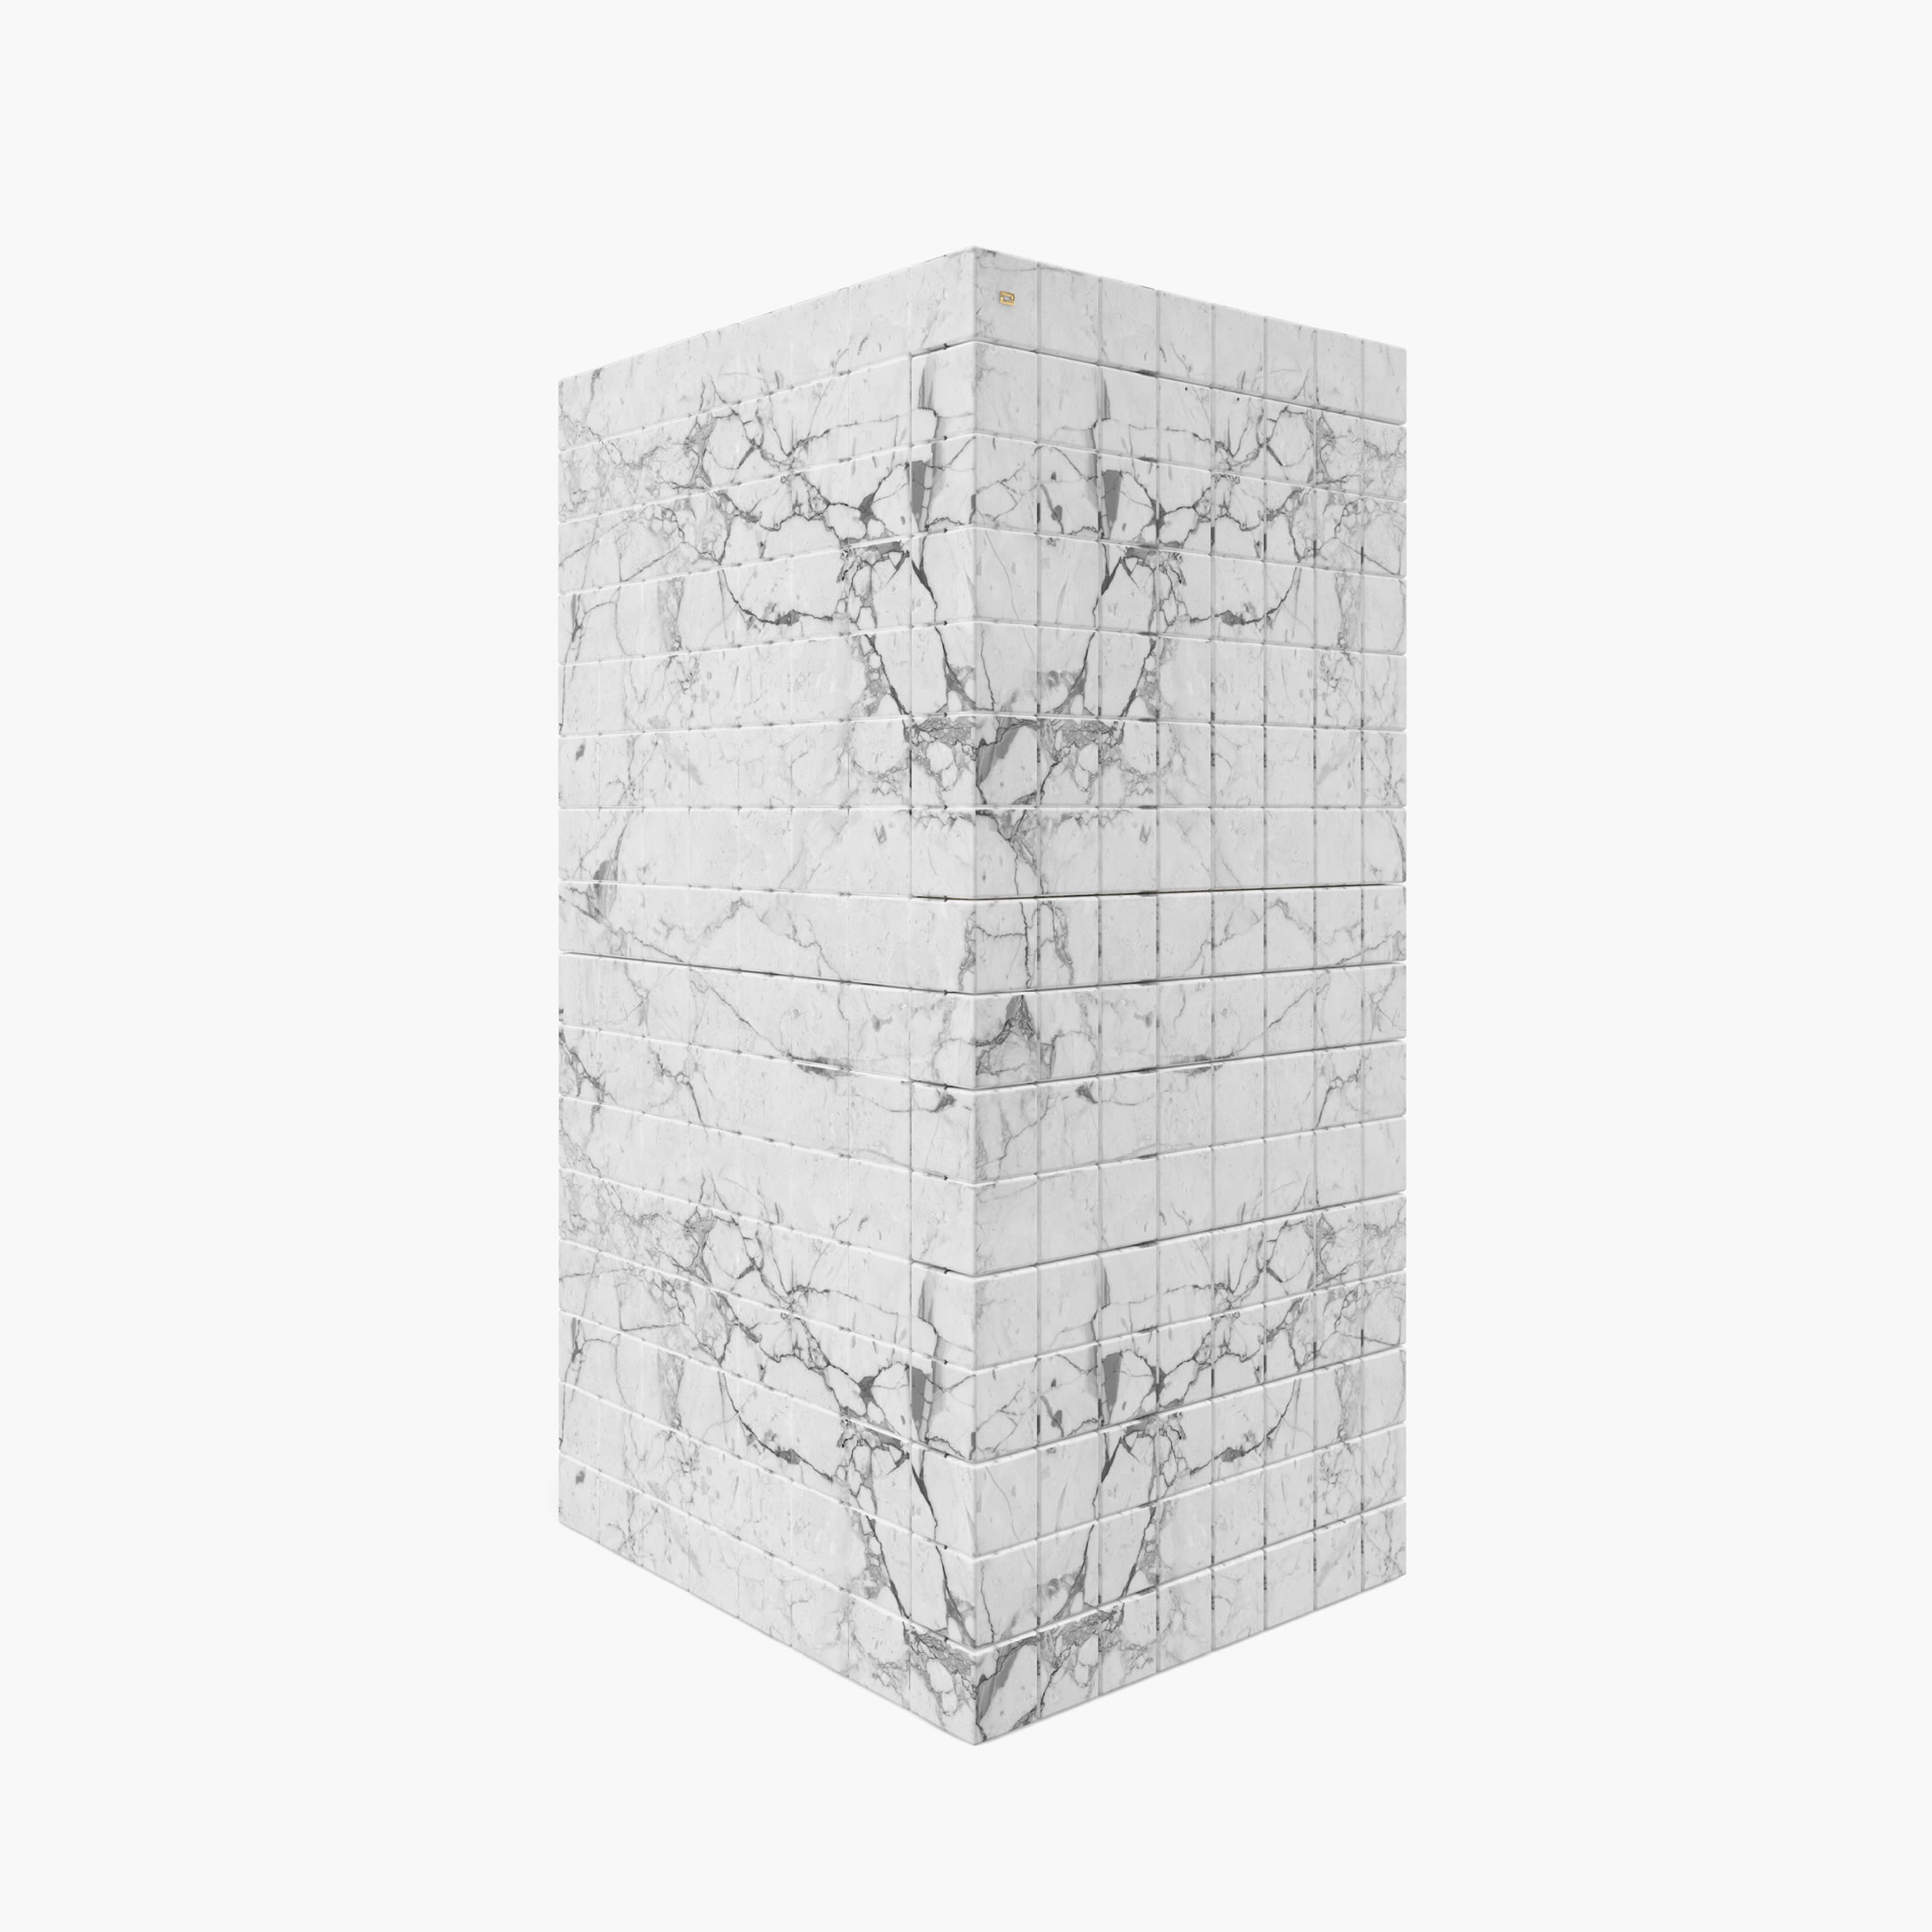 Cabinet of cuboids White Arabescato Marble limited edition Living Room creation Cabinets FS 148 FELIX SCHWAKE